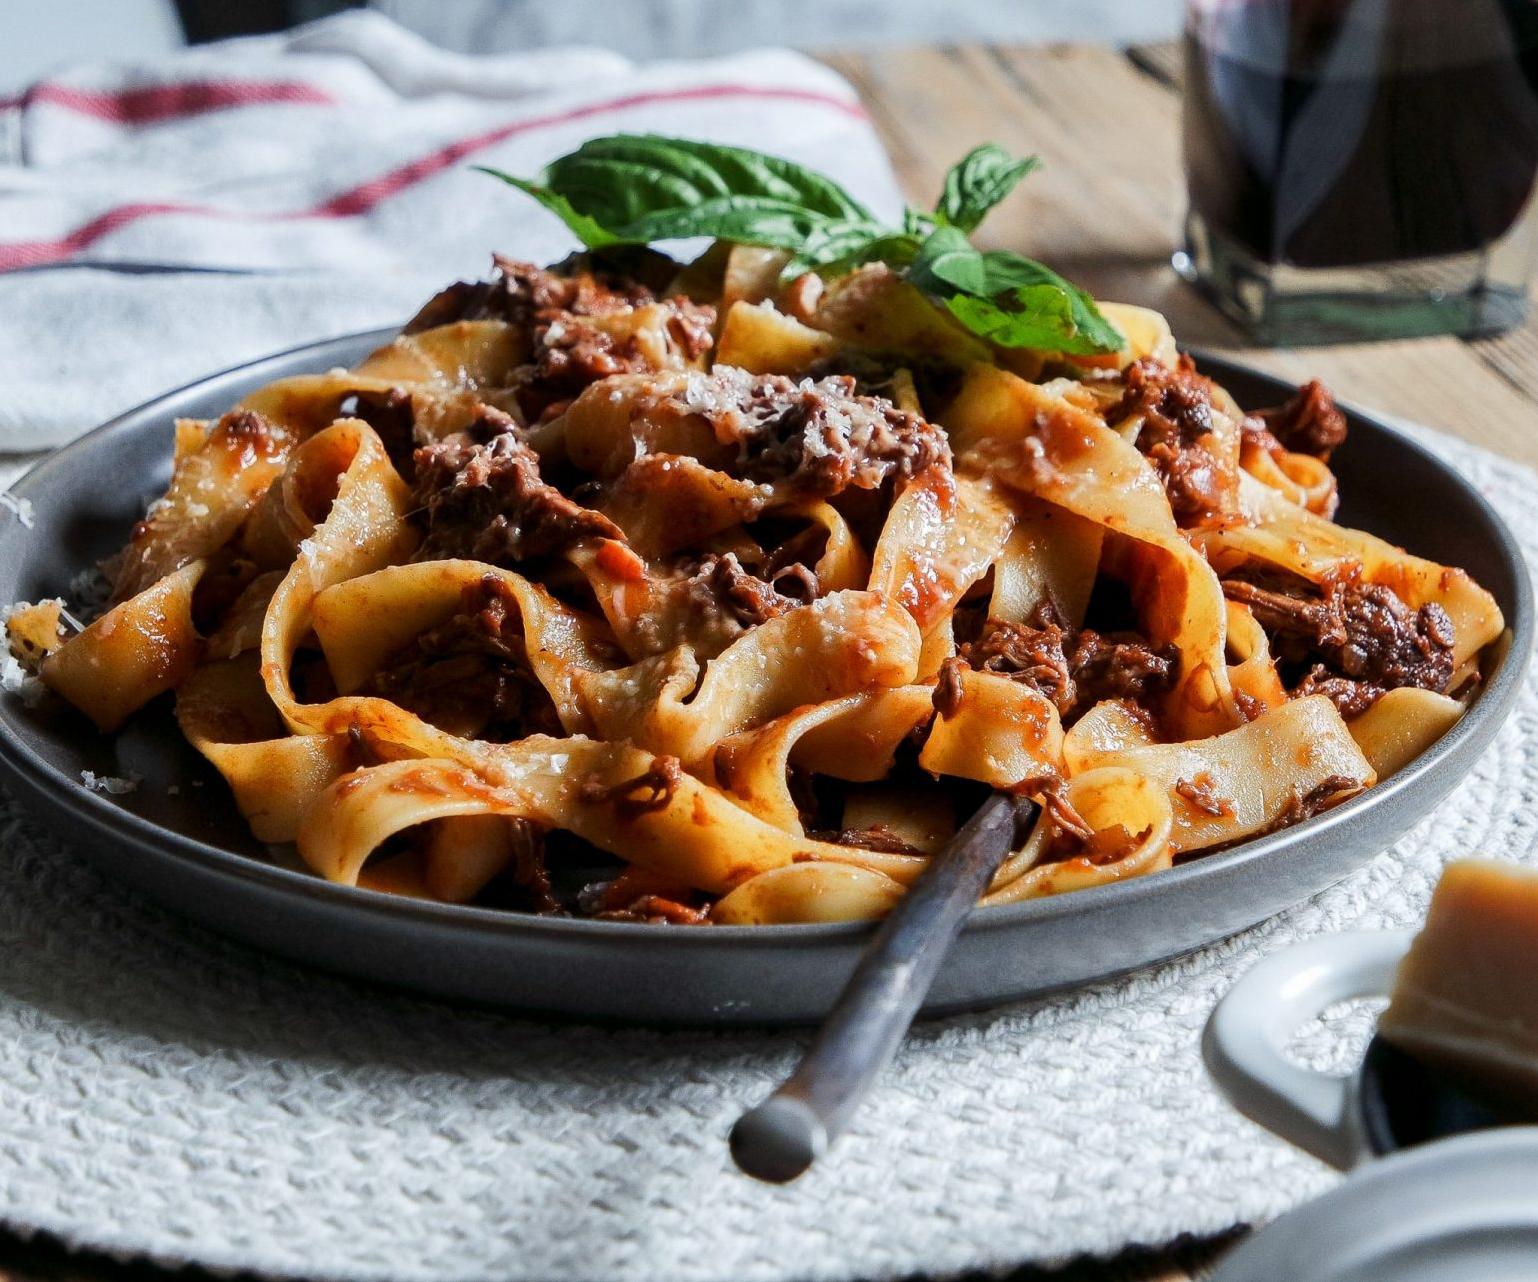  A comforting bowl of pappardelle with a rich meat ragù.